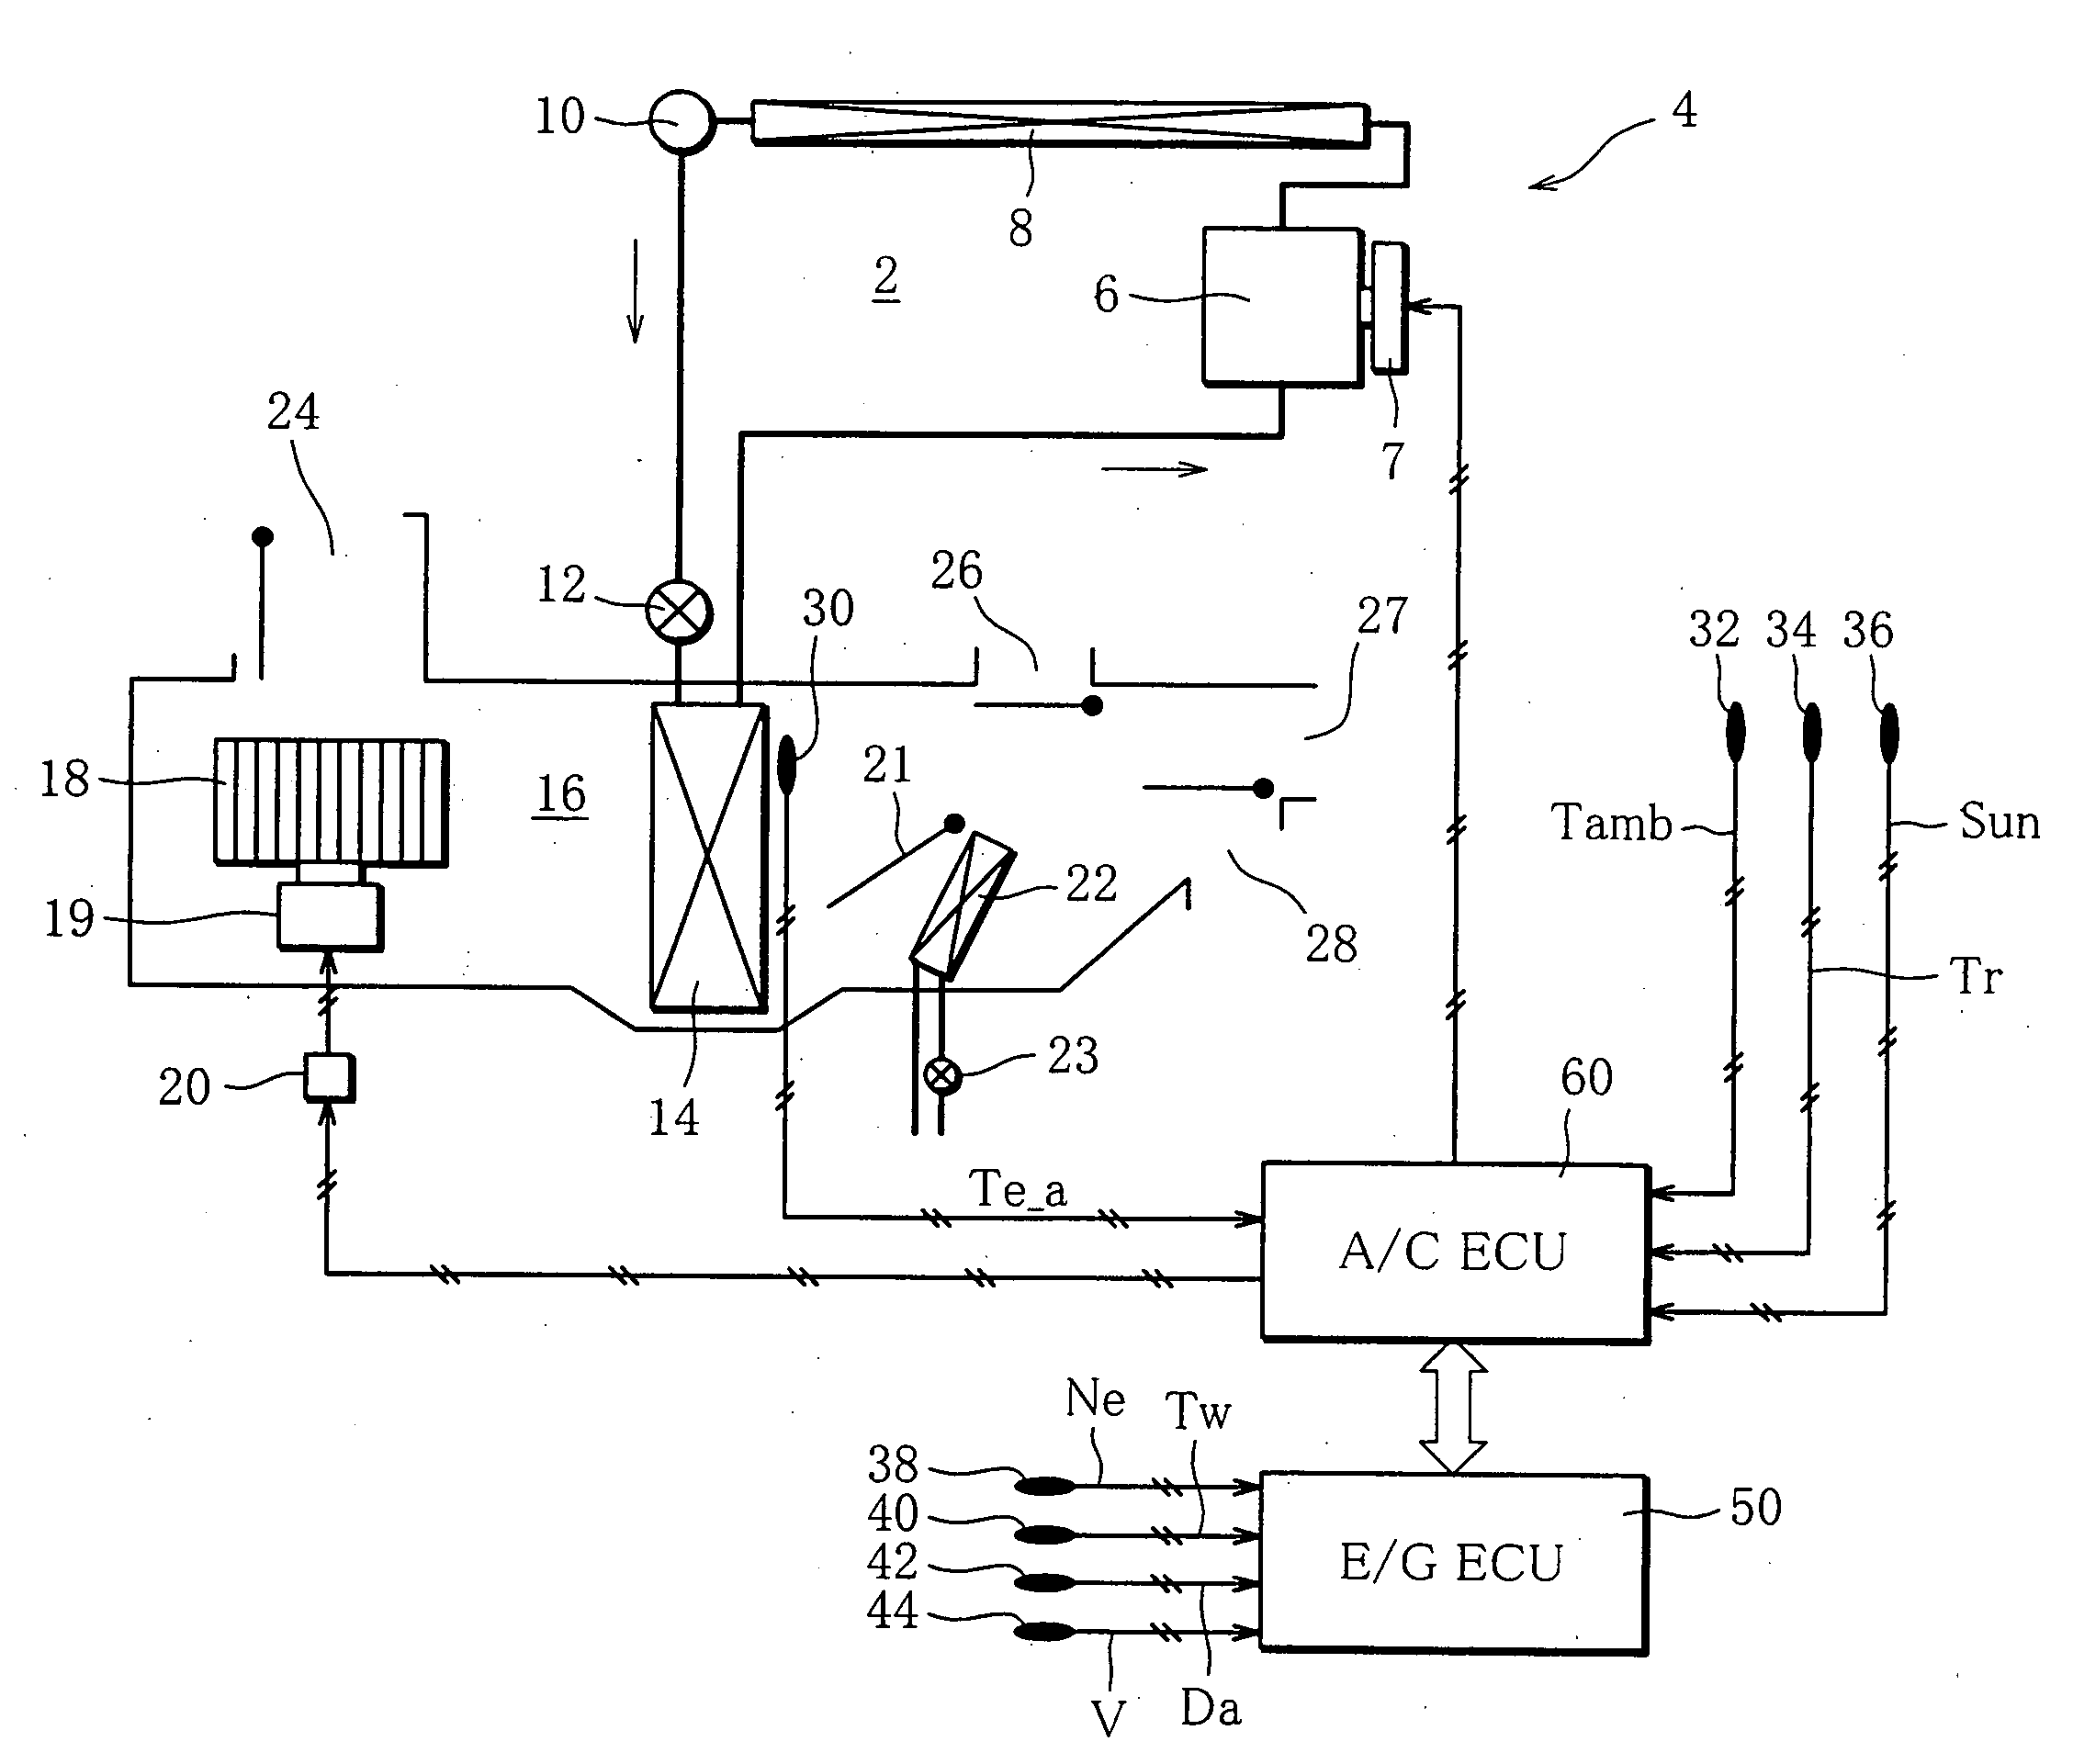 Air-conditioning system for vehicle